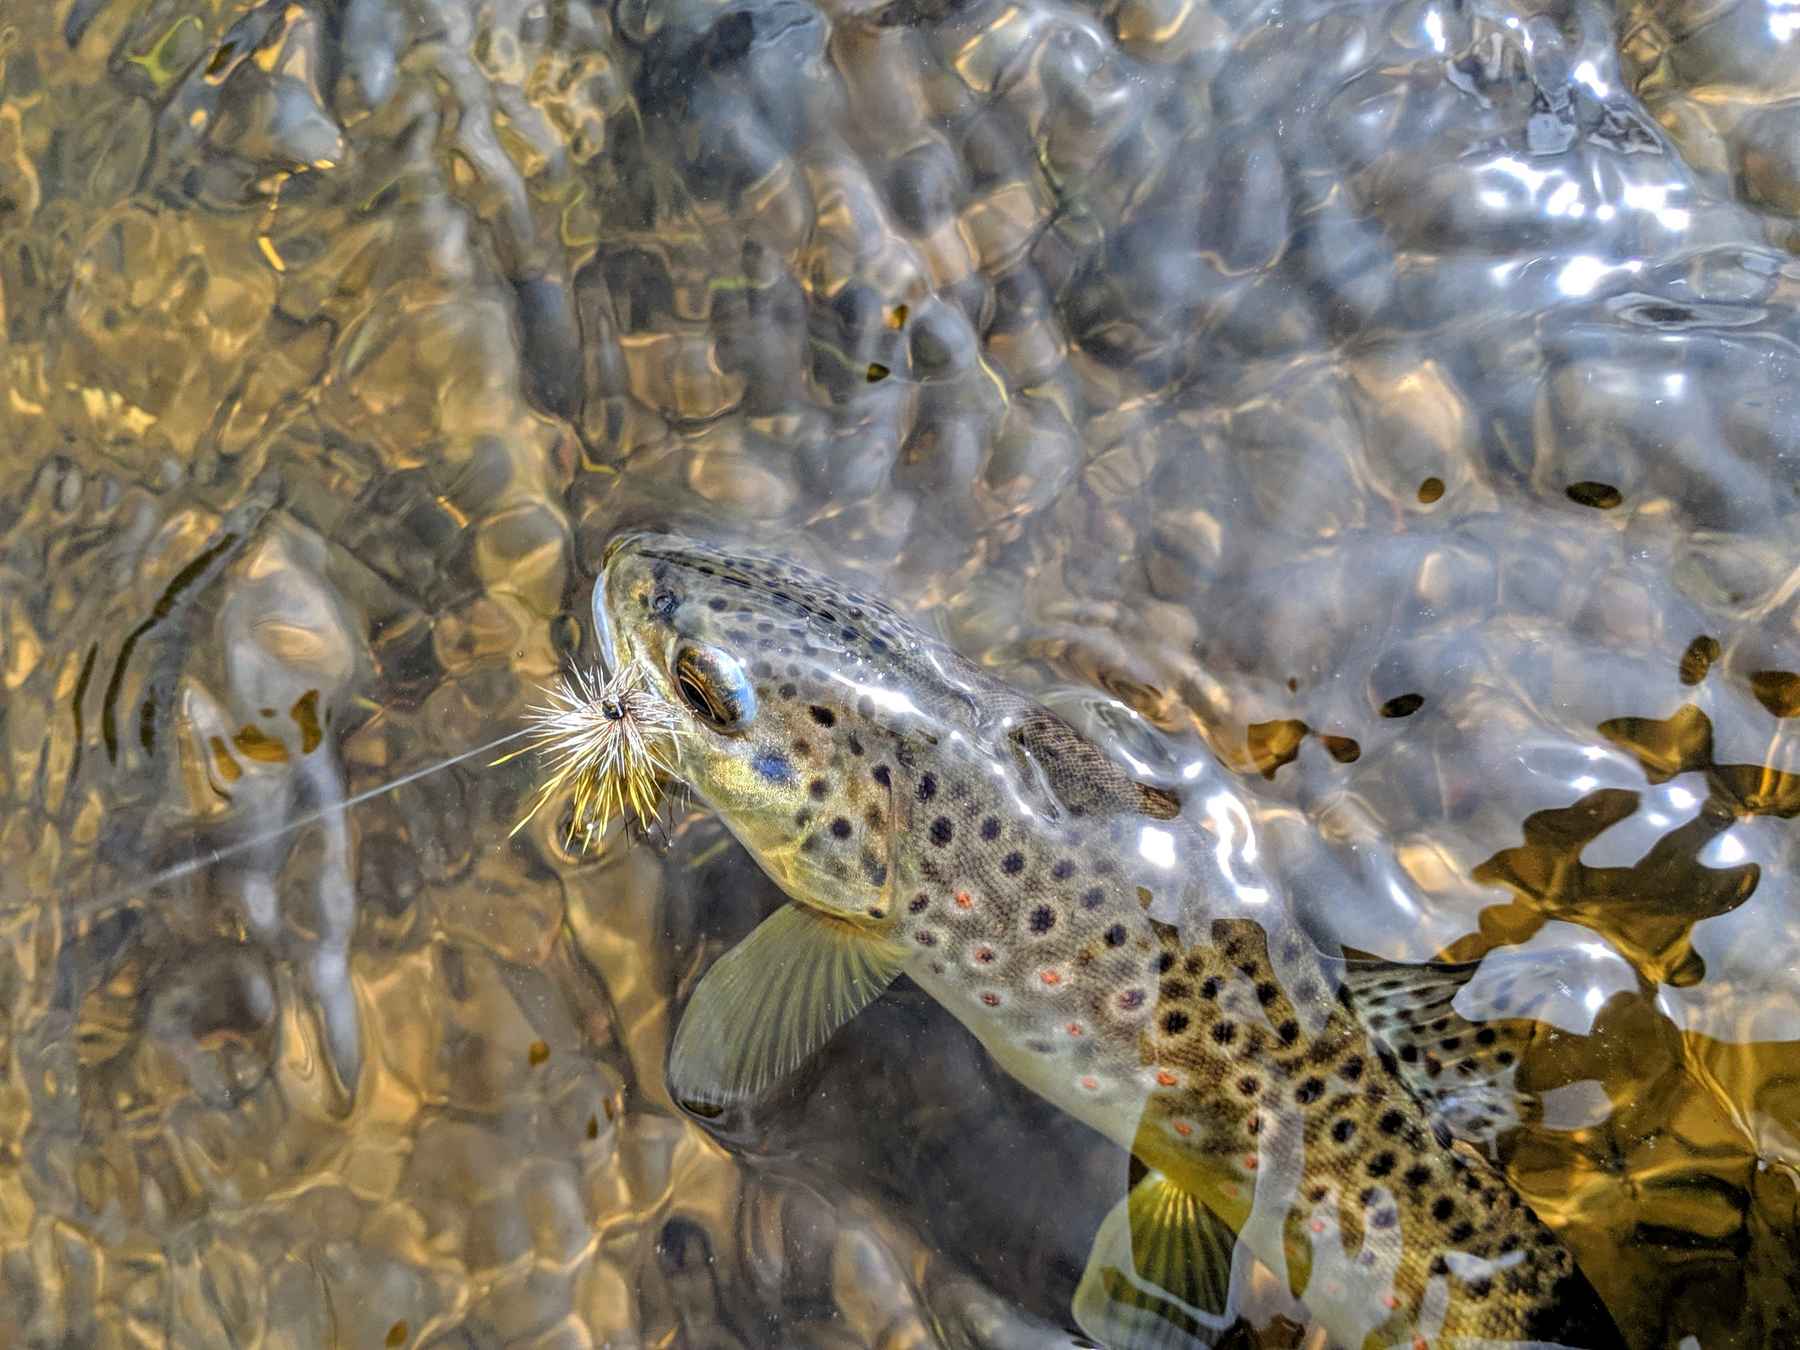 5 great small-stream fisheries for your Yellowstone road trip